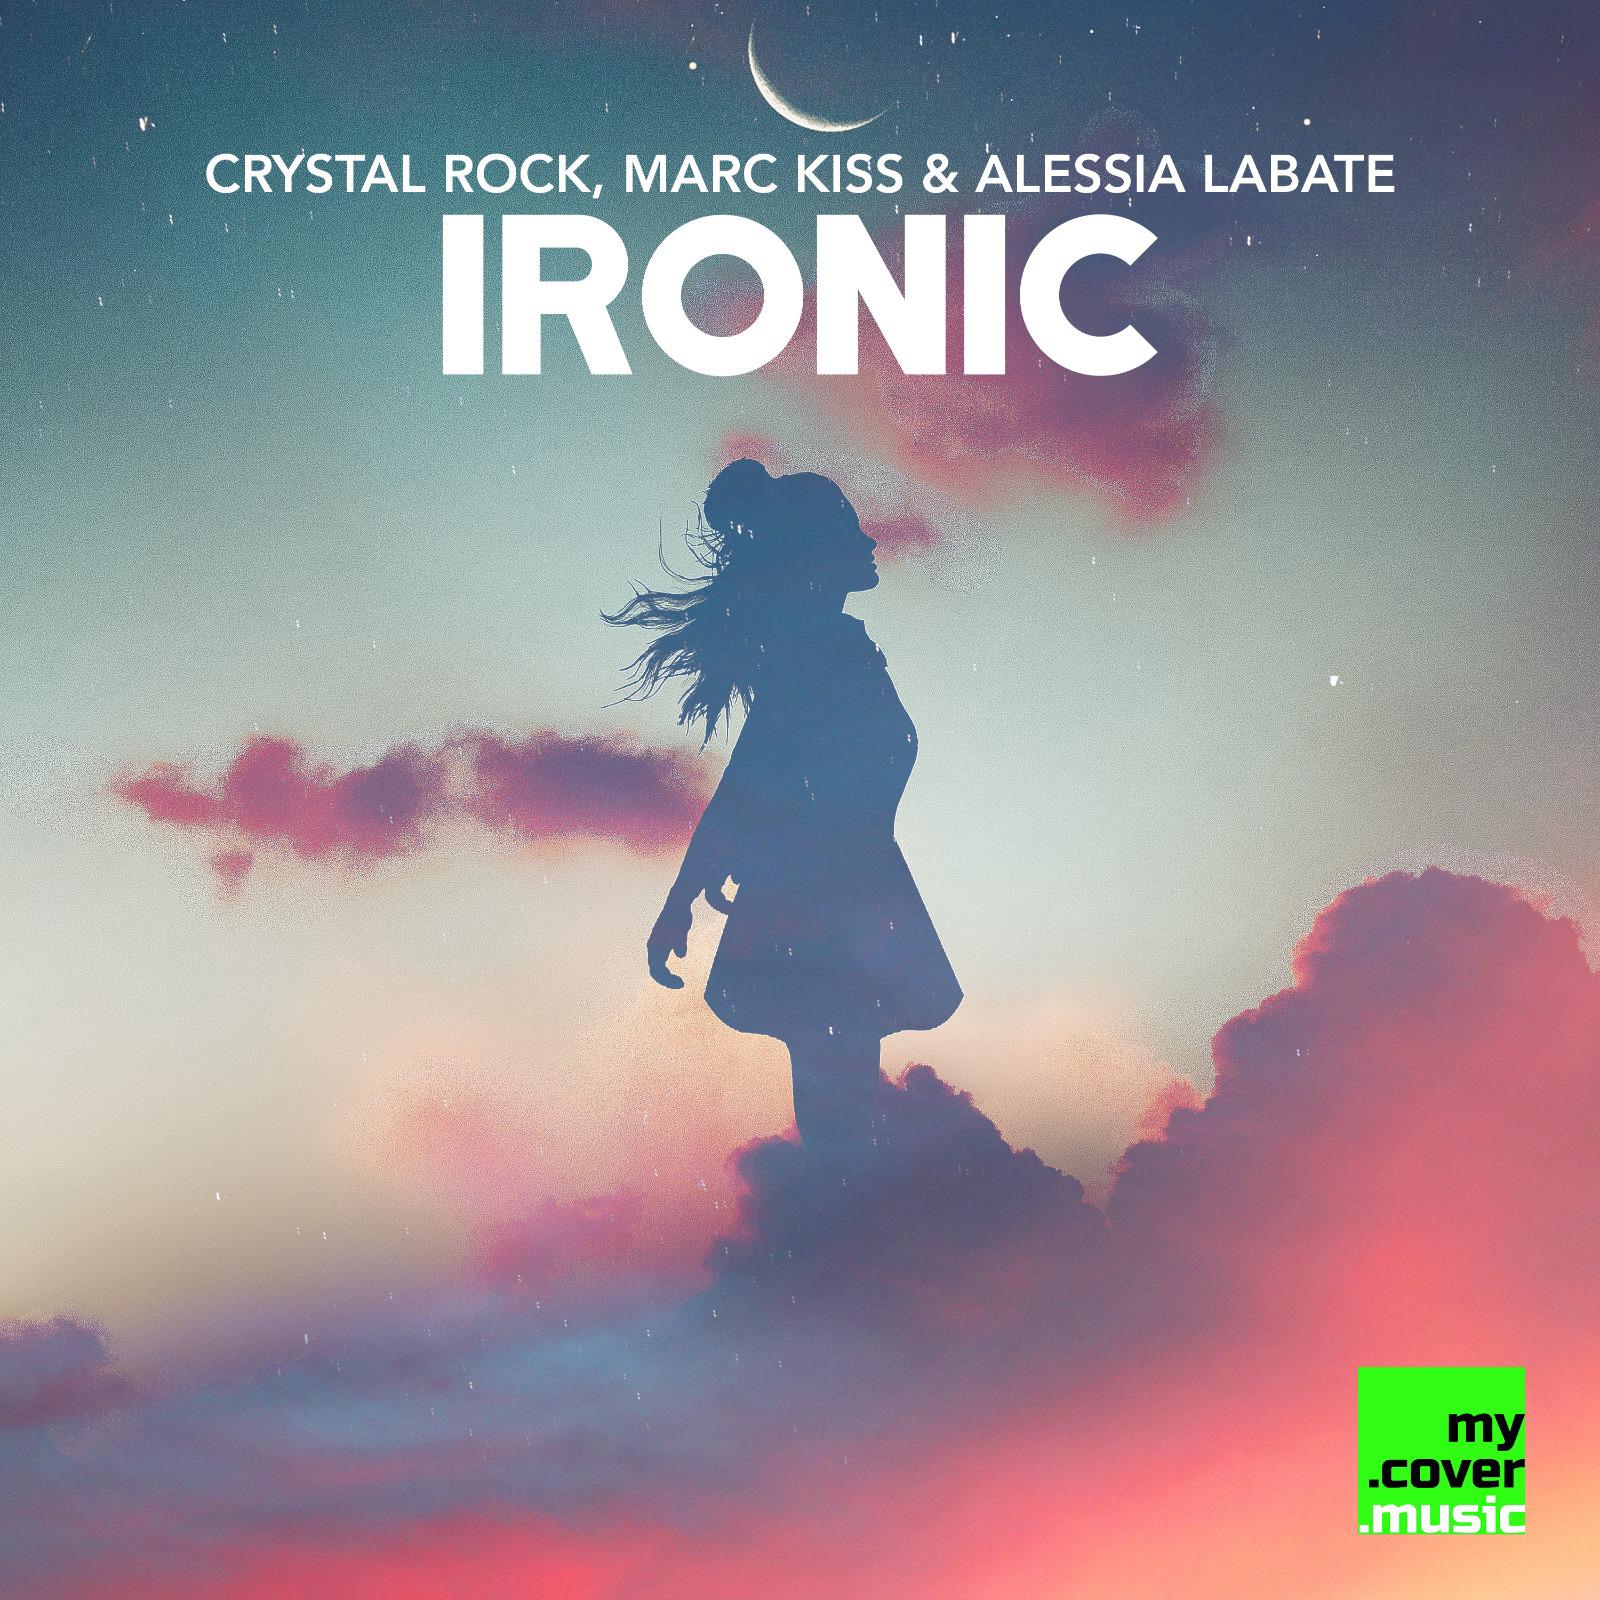 Crystal Rock & Marc Kiss ft. Alessia Labate - Ironic